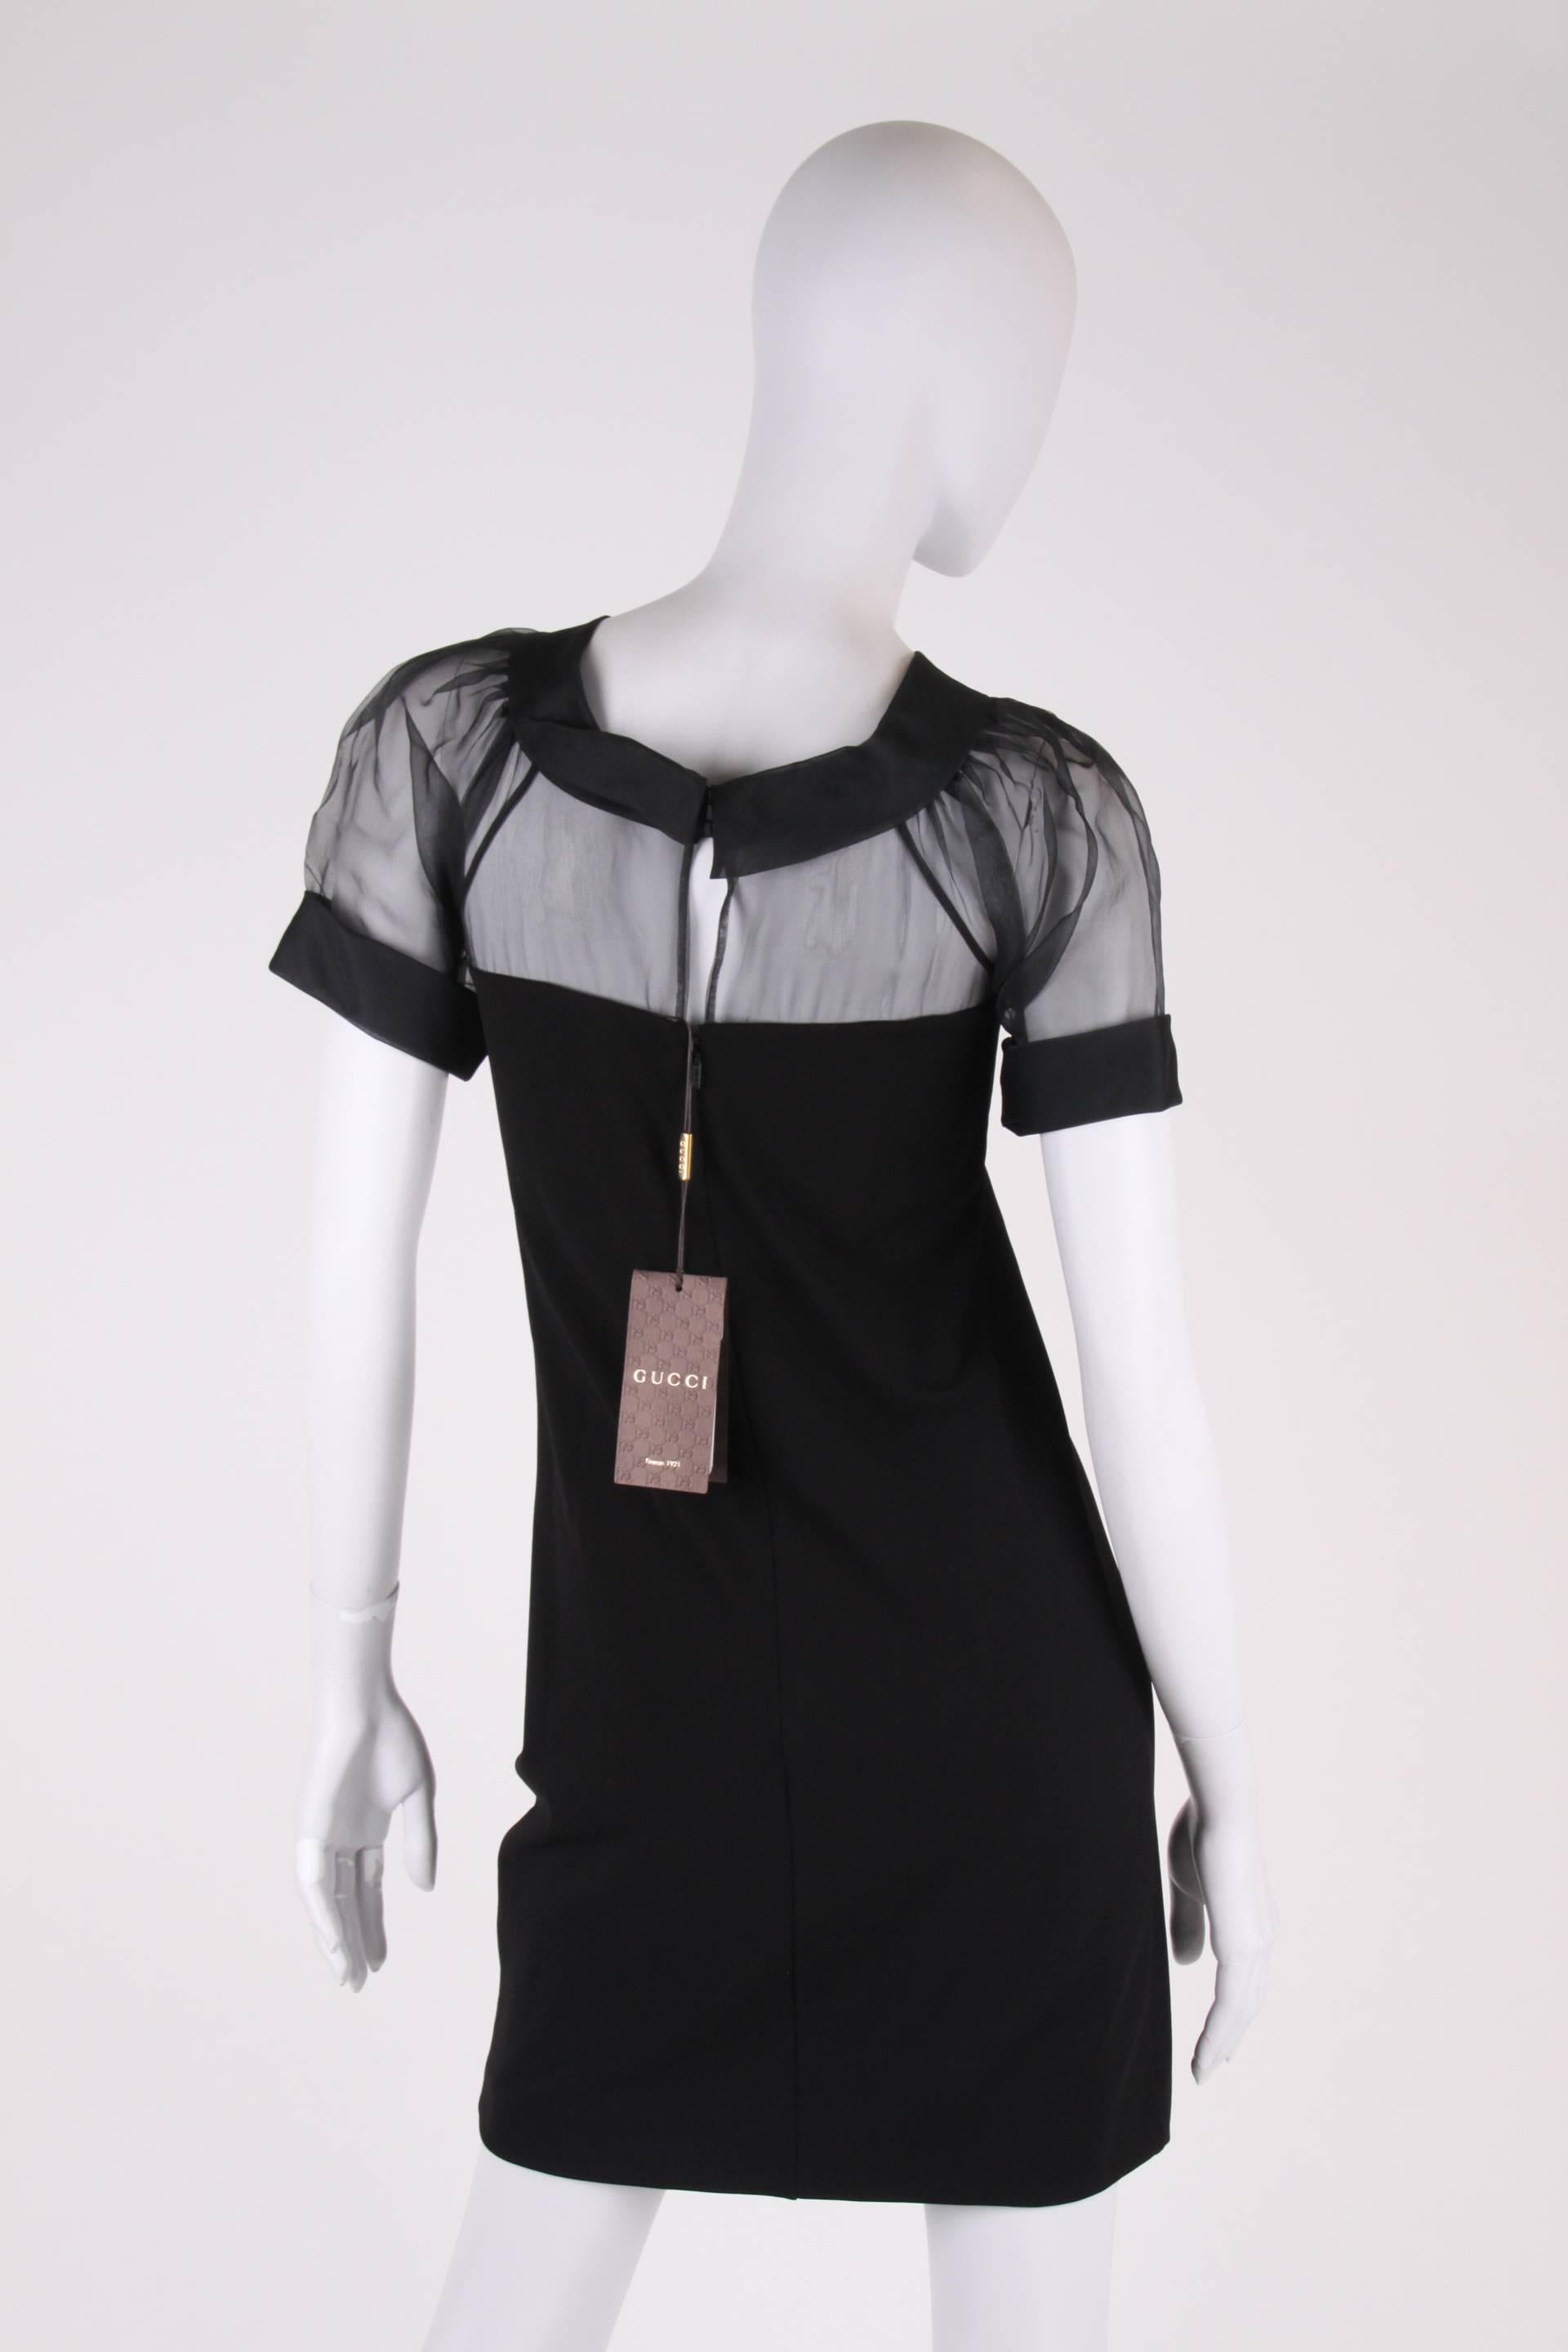 Stylish Gucci dress, the upper part is made of translucent black silk.

A round collar and short puffed sleeves, this dress has a zip closure on the back. The lower part is crafted in stretching fabric, for tailored fitting to the body. A little bit